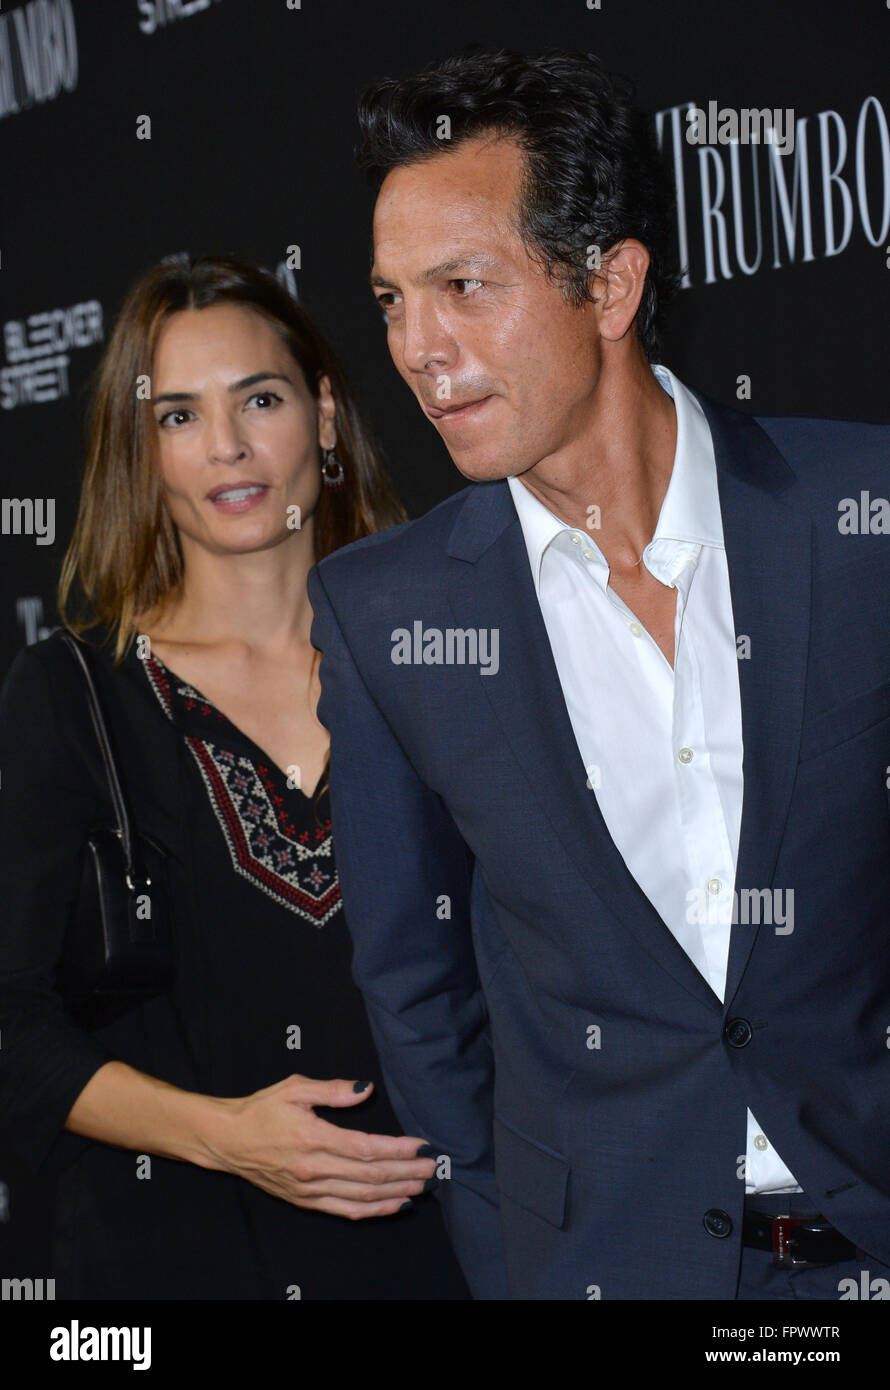 LOS ANGELES, CA - OCTOBER 27, 2015: Benjamin Bratt & wife Talisa Soto at the US premiere of 'Trumbo' at the Academy of Motion Picture Arts & Sciences, Beverly Hills. Stock Photo